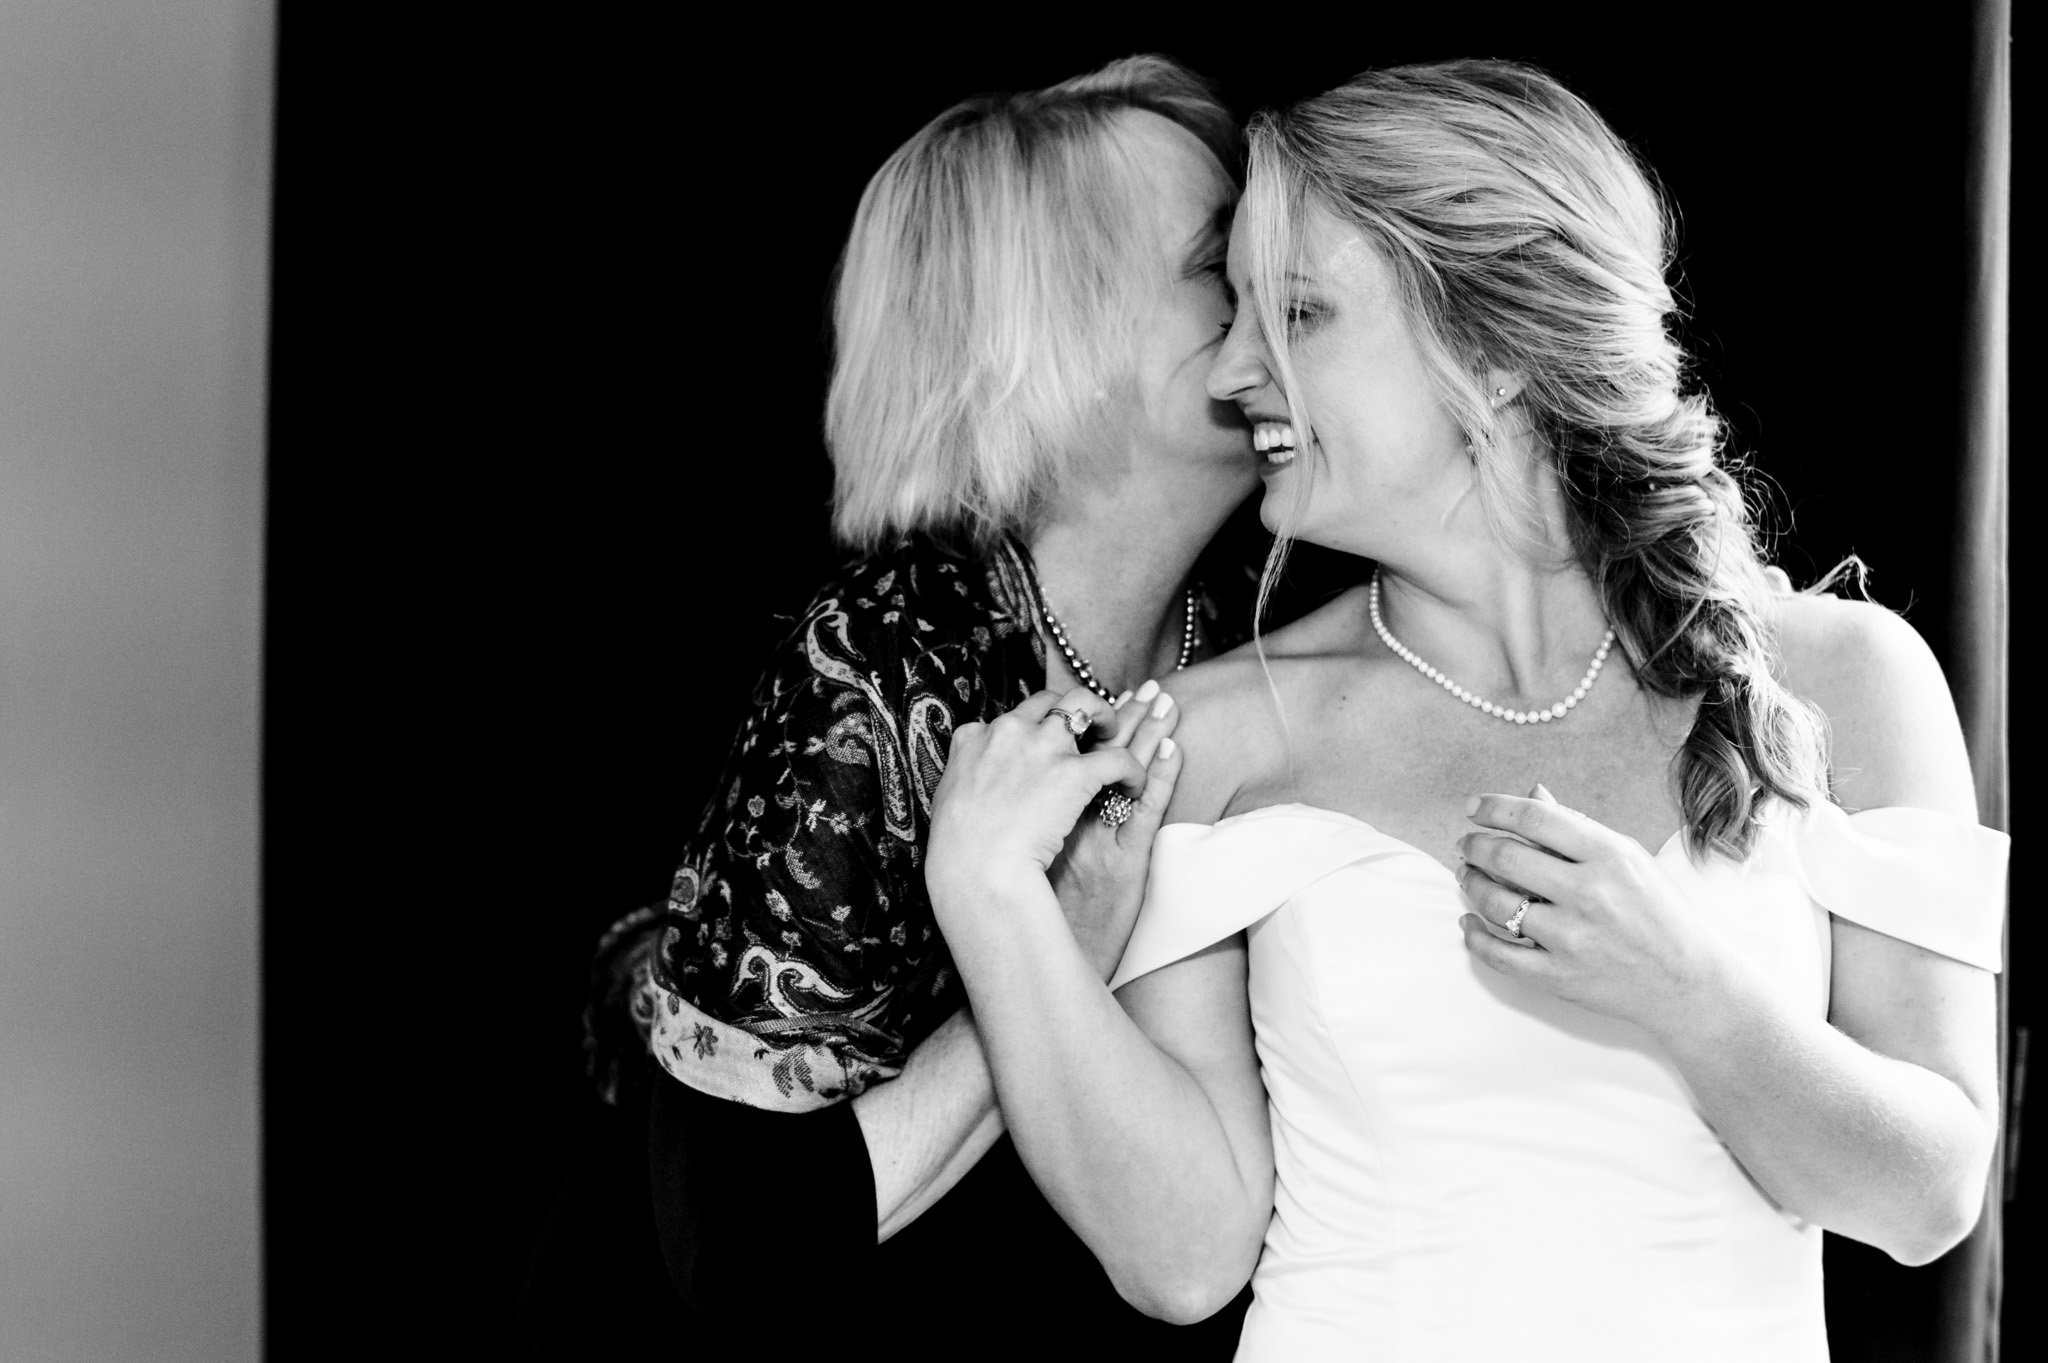 An emotional black and white photo capturing the heartfelt embrace between a bride and her mother at an Asheville wedding.